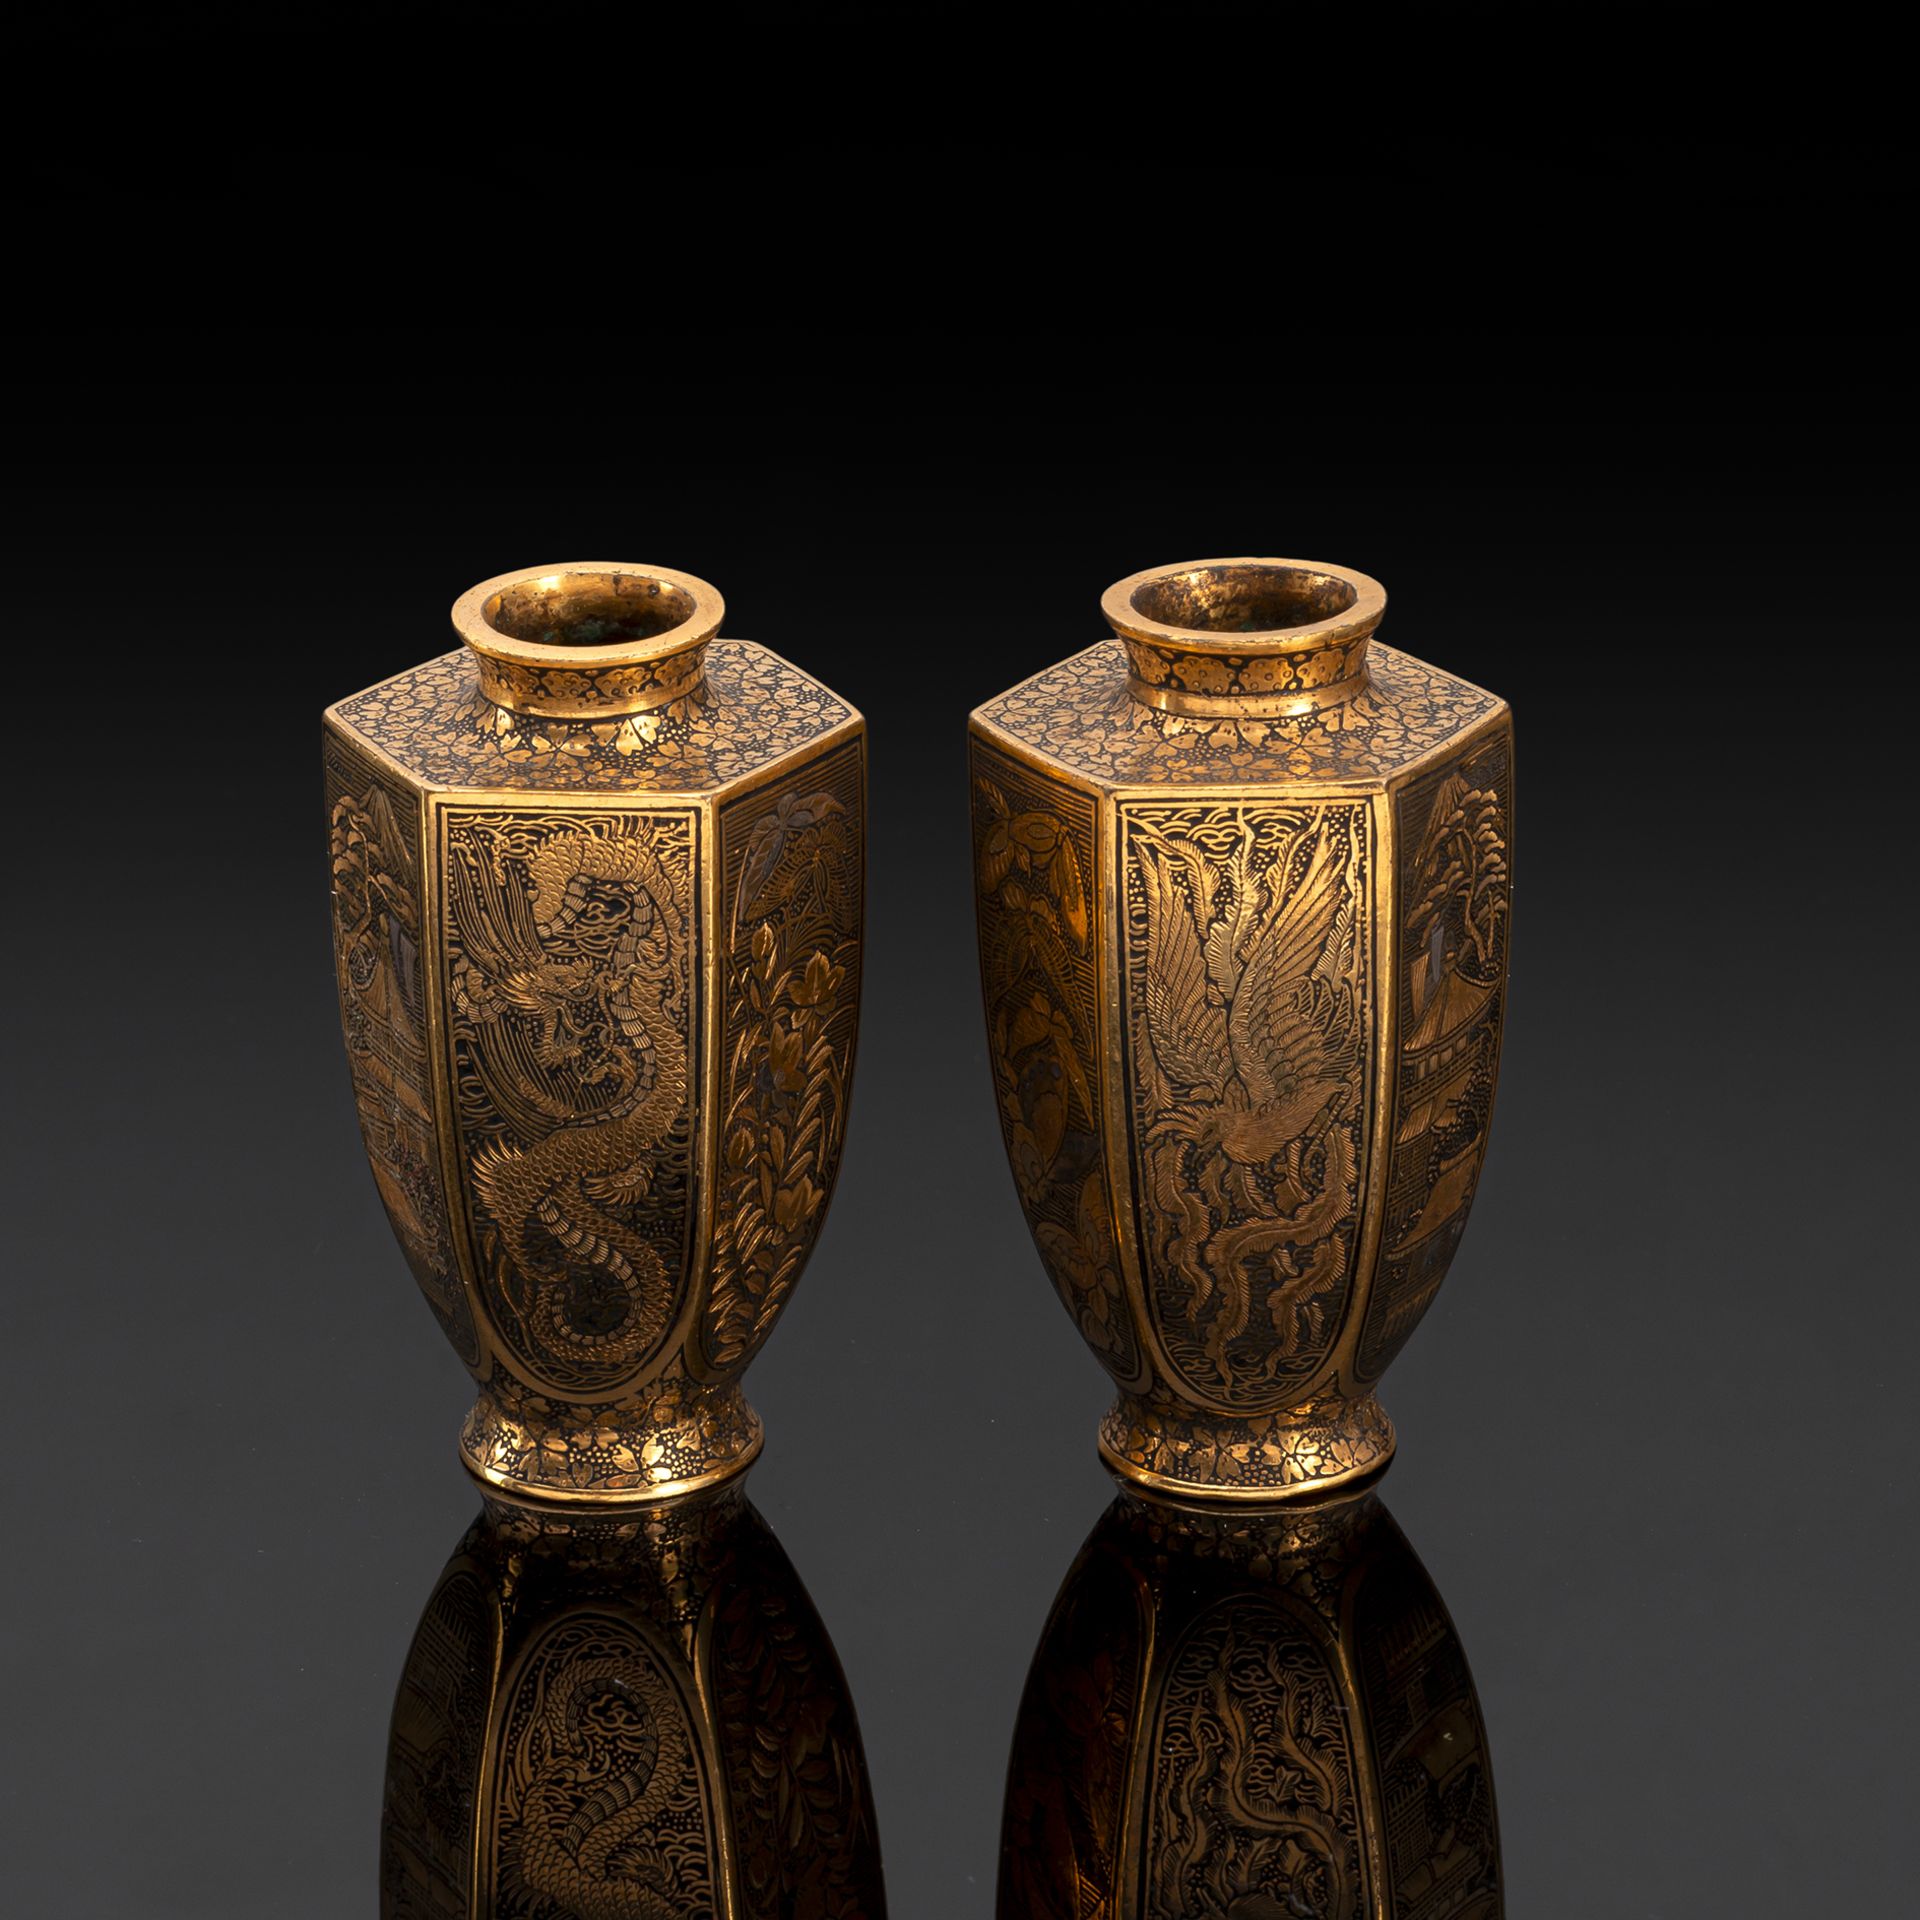 A PAIR OF KOMAI STYLE MINIATURE VASES WITH GOLD AND SILVER INLAYS